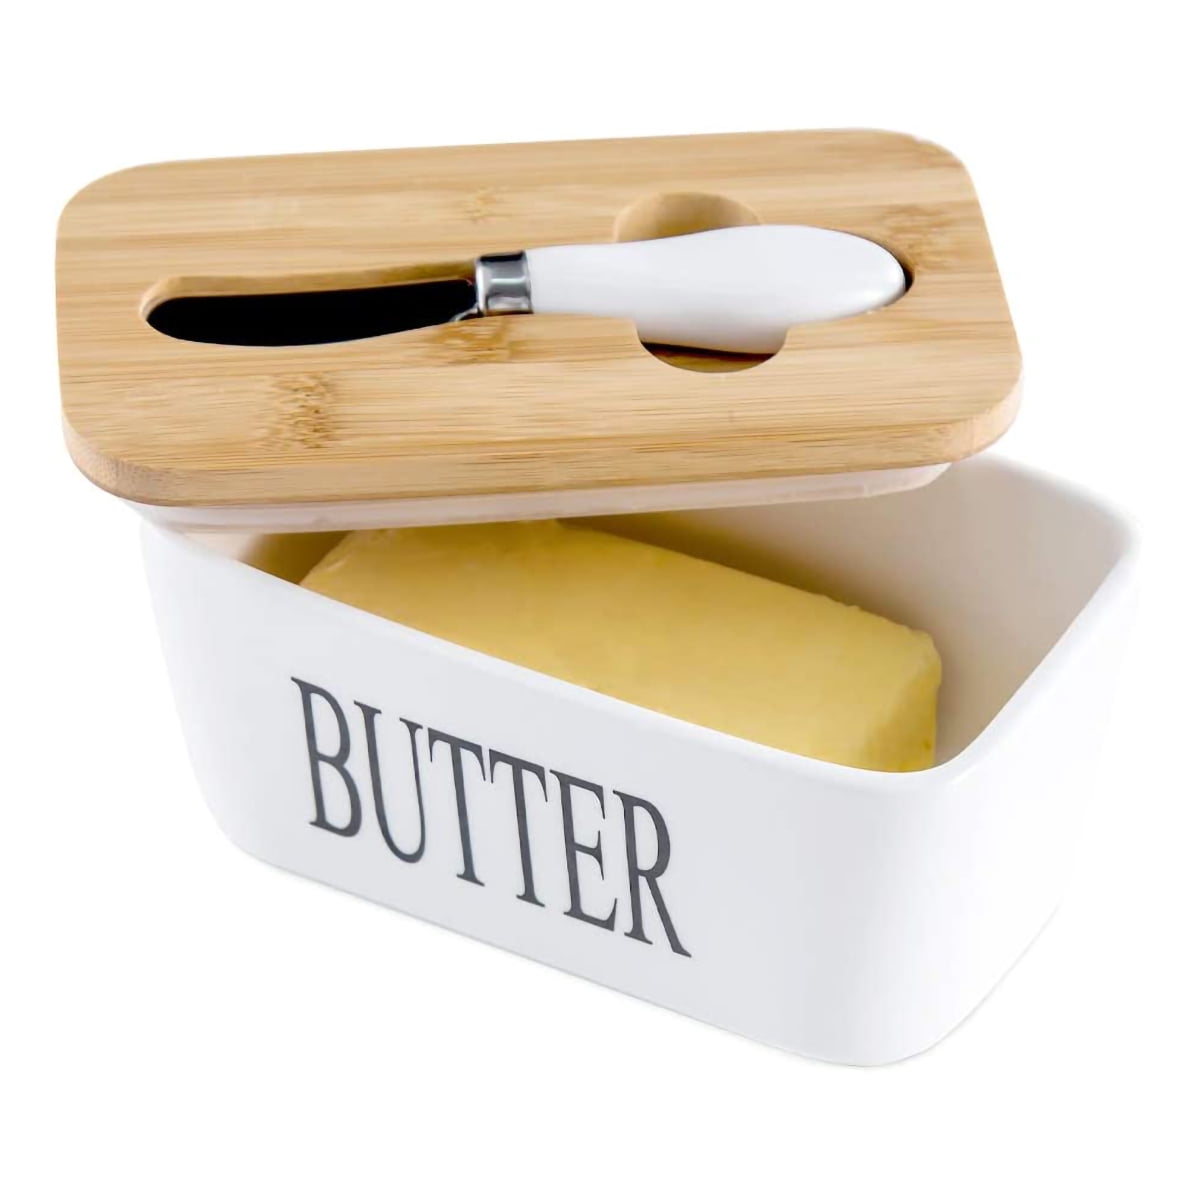 Airy Blue Airtight Butter Container with Cover Large Butter Dish with Wooden Lid DOWAN Porcelain Butter Dish Farmhouse Butter Keeper for 2 Sticks of Butter 